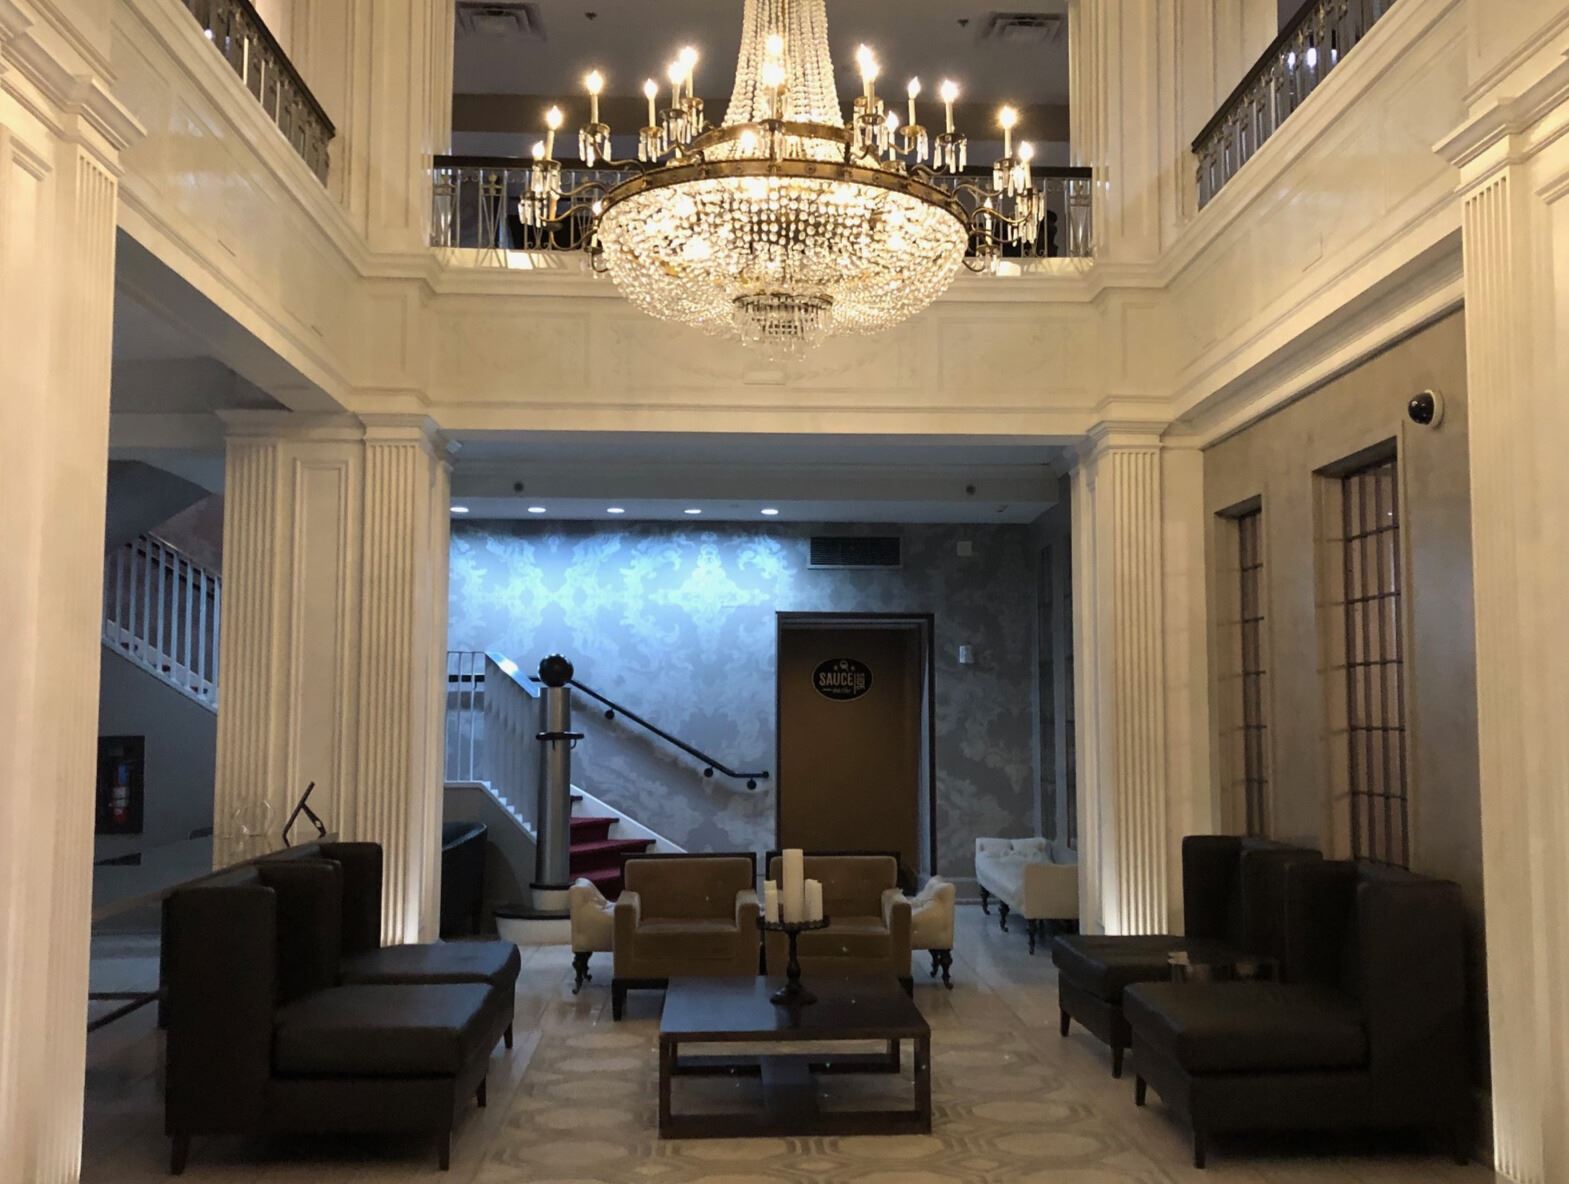 Stately lobby of the Magnolia Hotel with chandelier